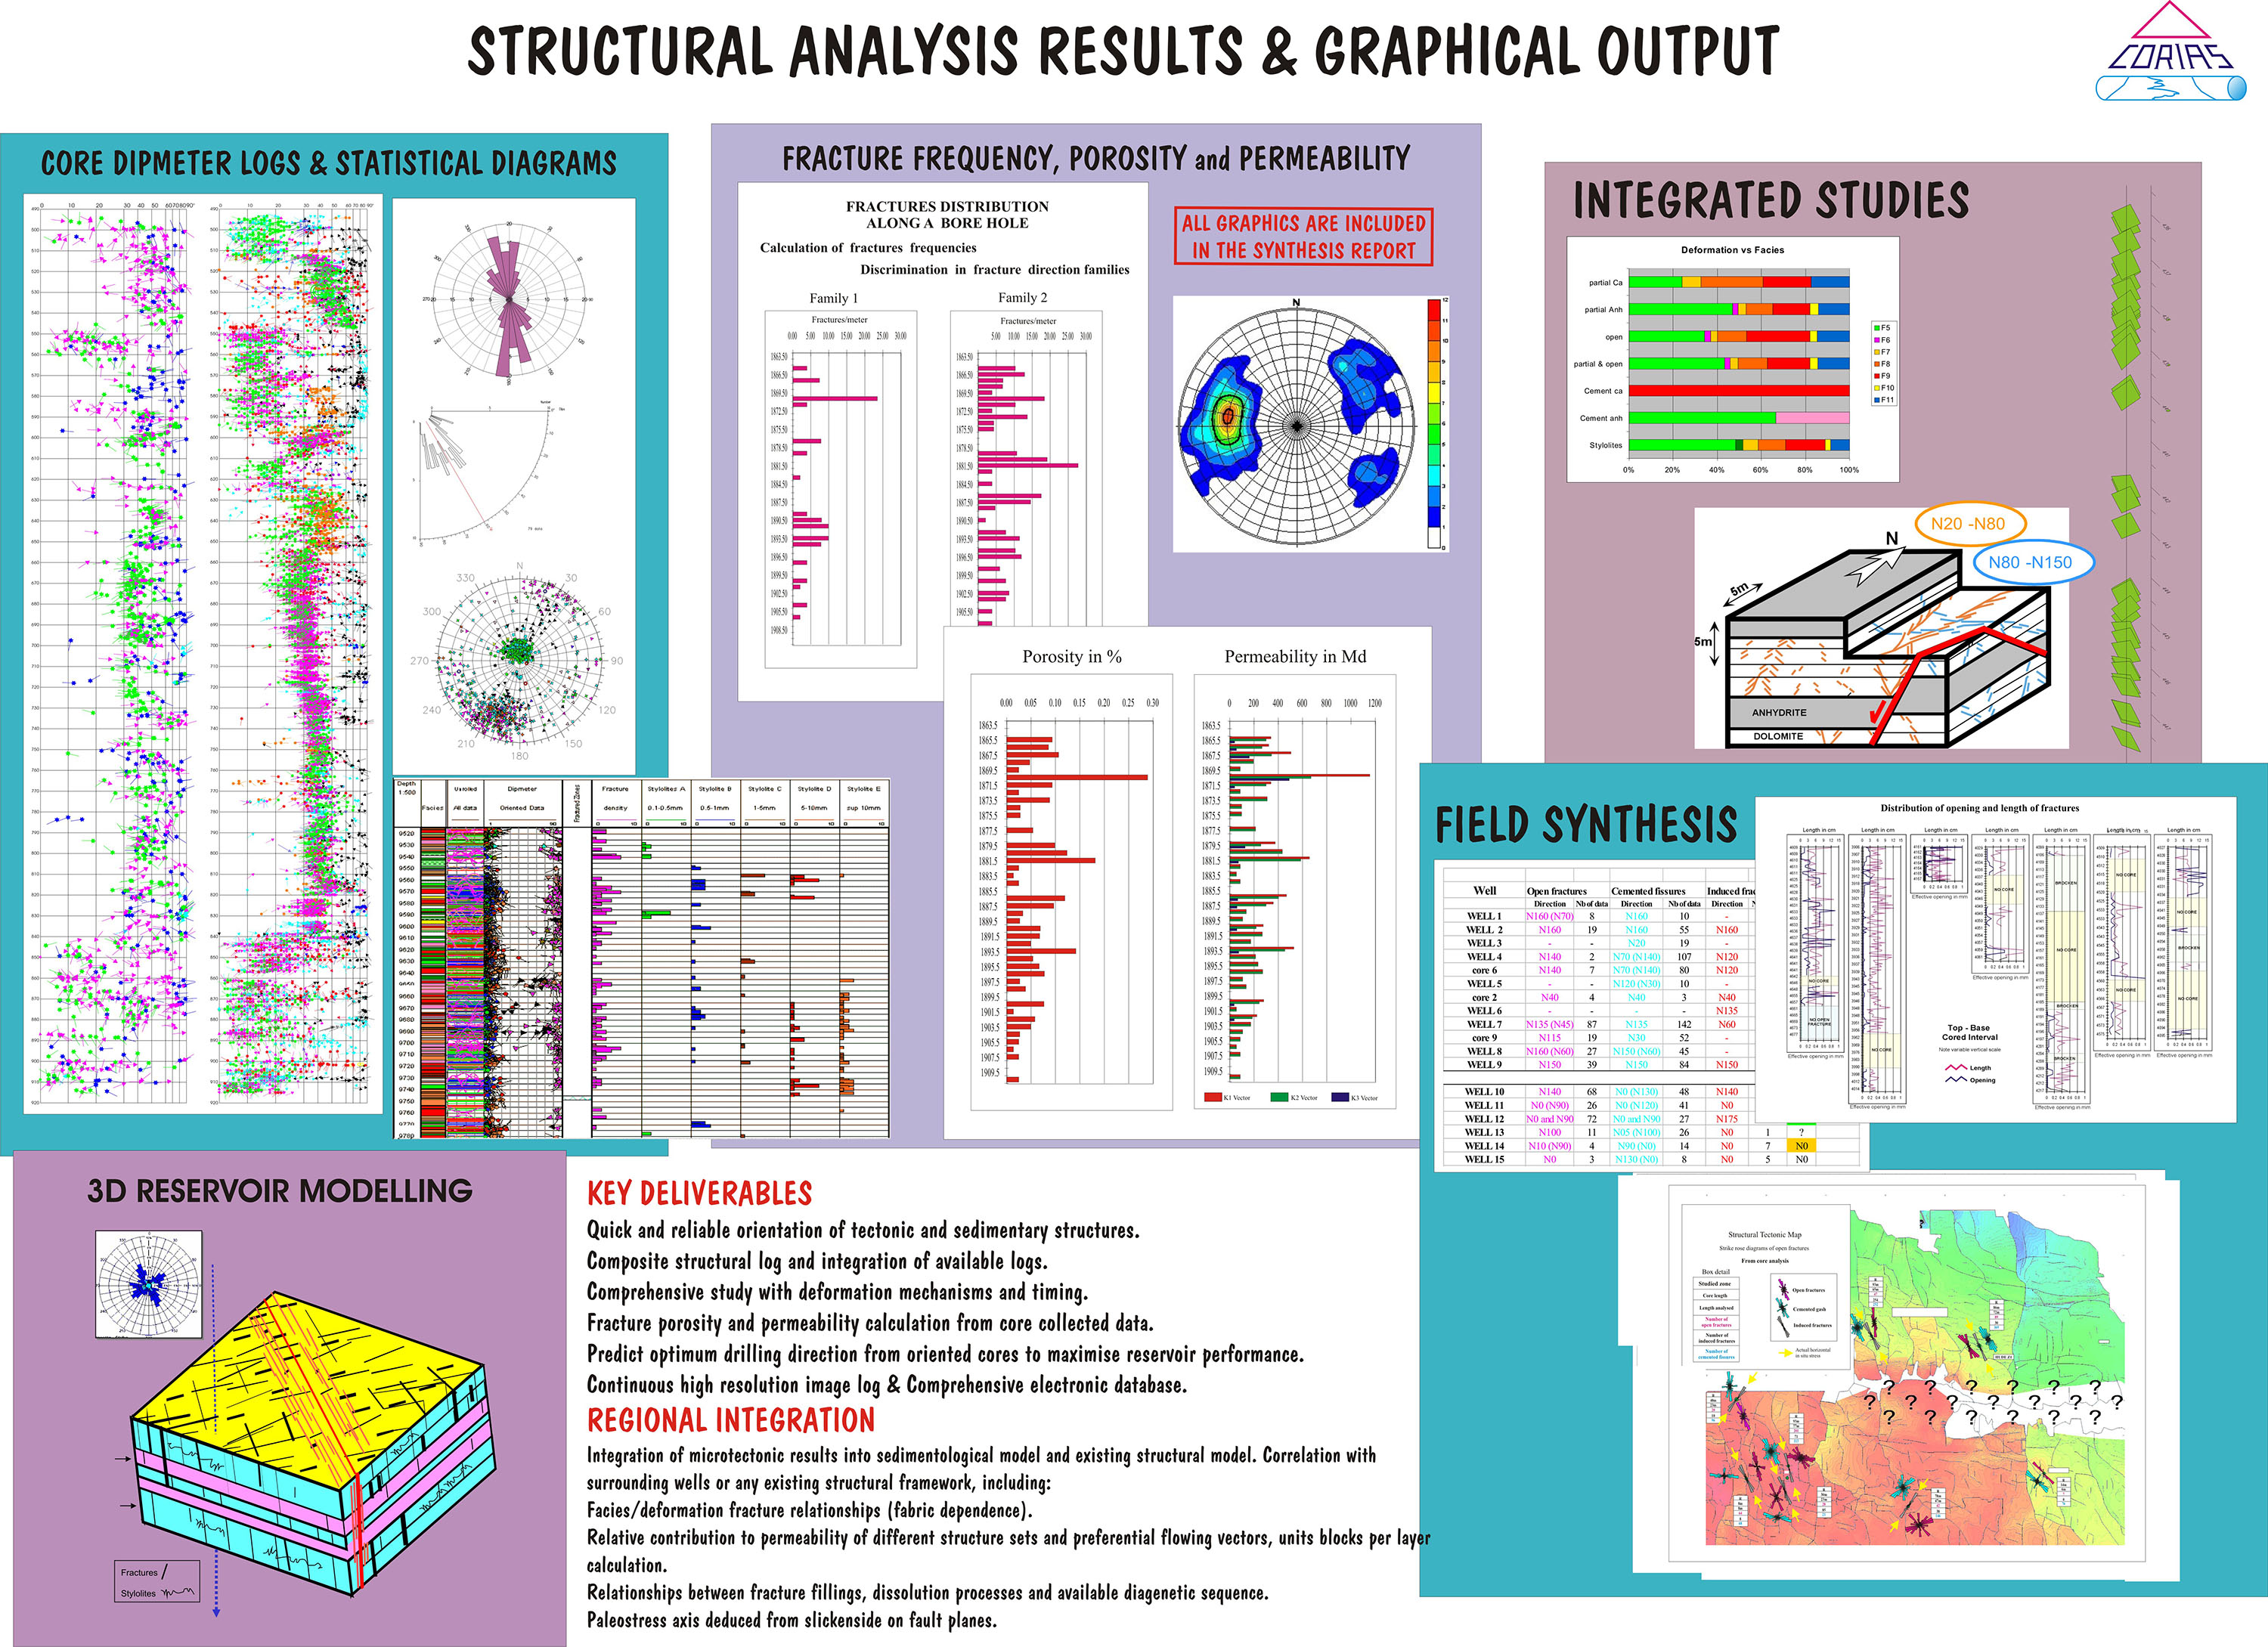  Corias Structural analysis results and graphical output